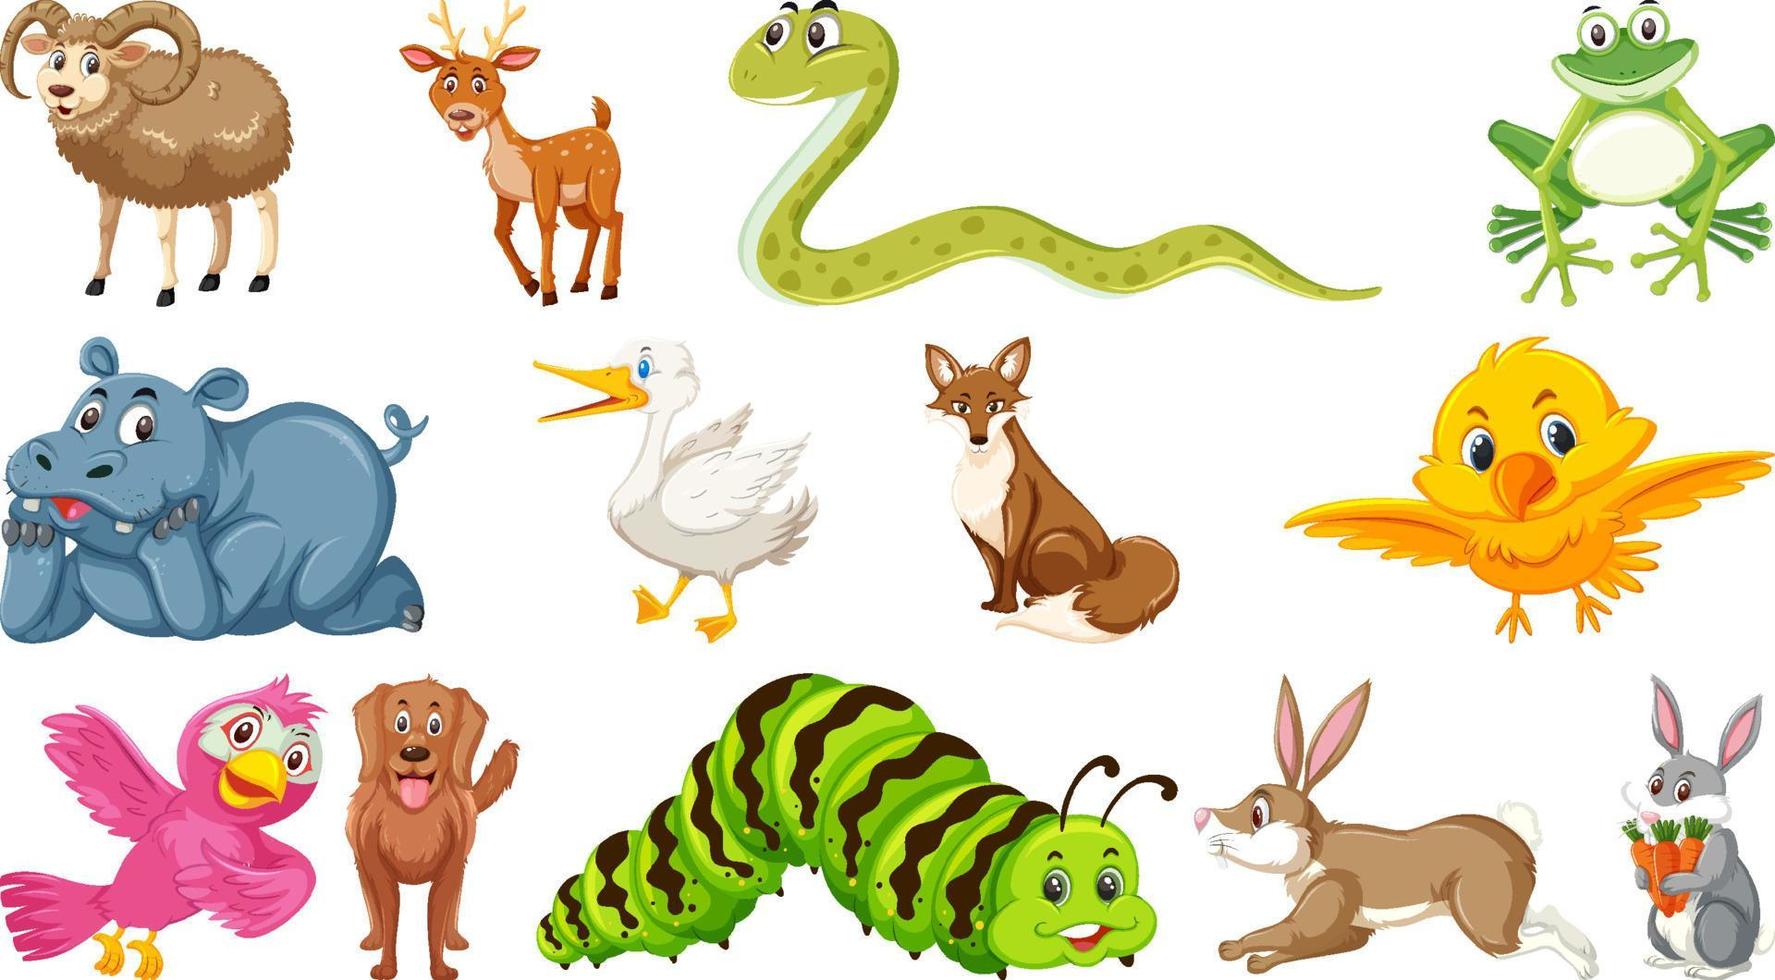 Set of isolated various animals vector